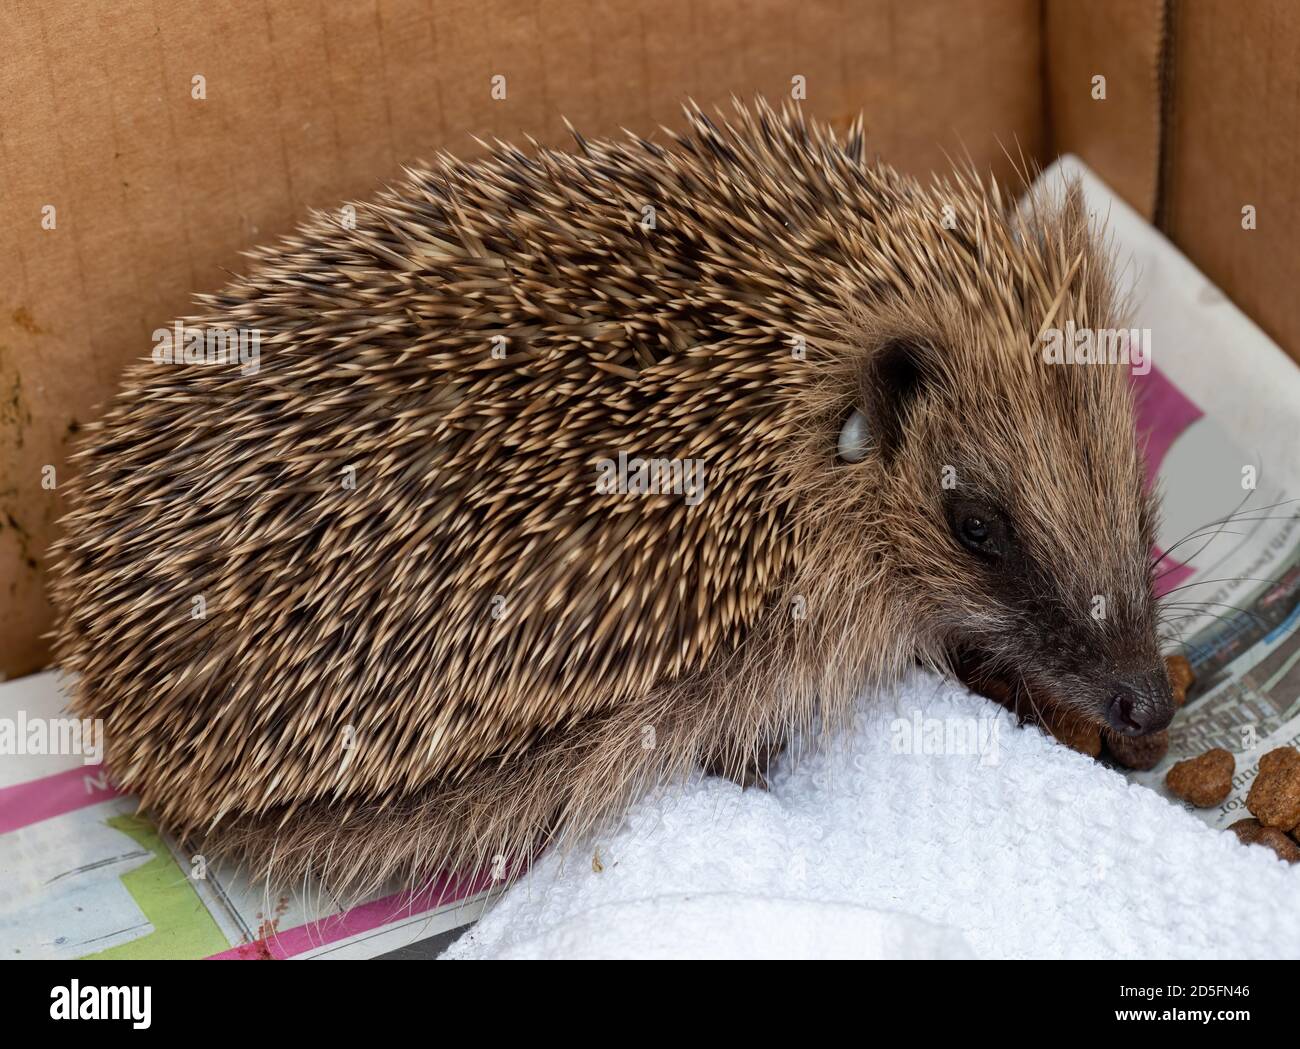 Small, injured rescue hedgehog in box with kibble. Tick also visible. Stock Photo